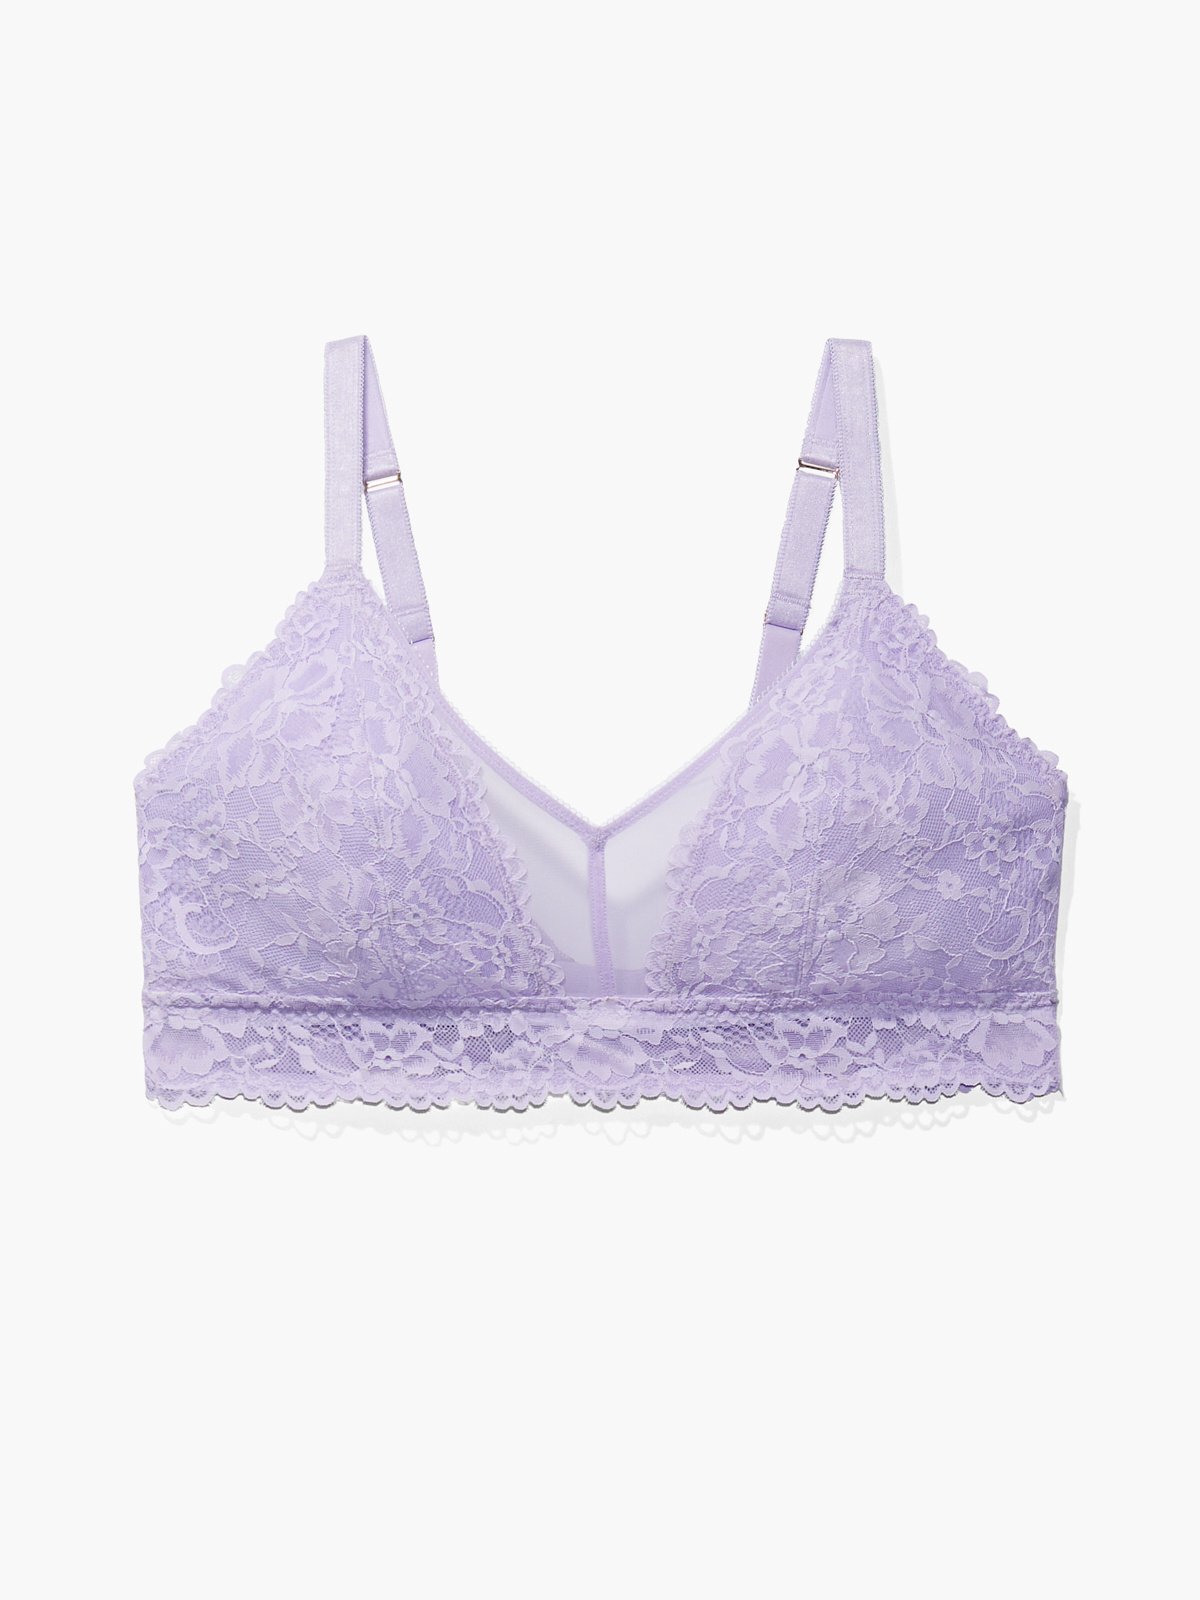 Free People NWOT intimately lavender strappy bralette Purple Size M - $35  (22% Off Retail) - From roya